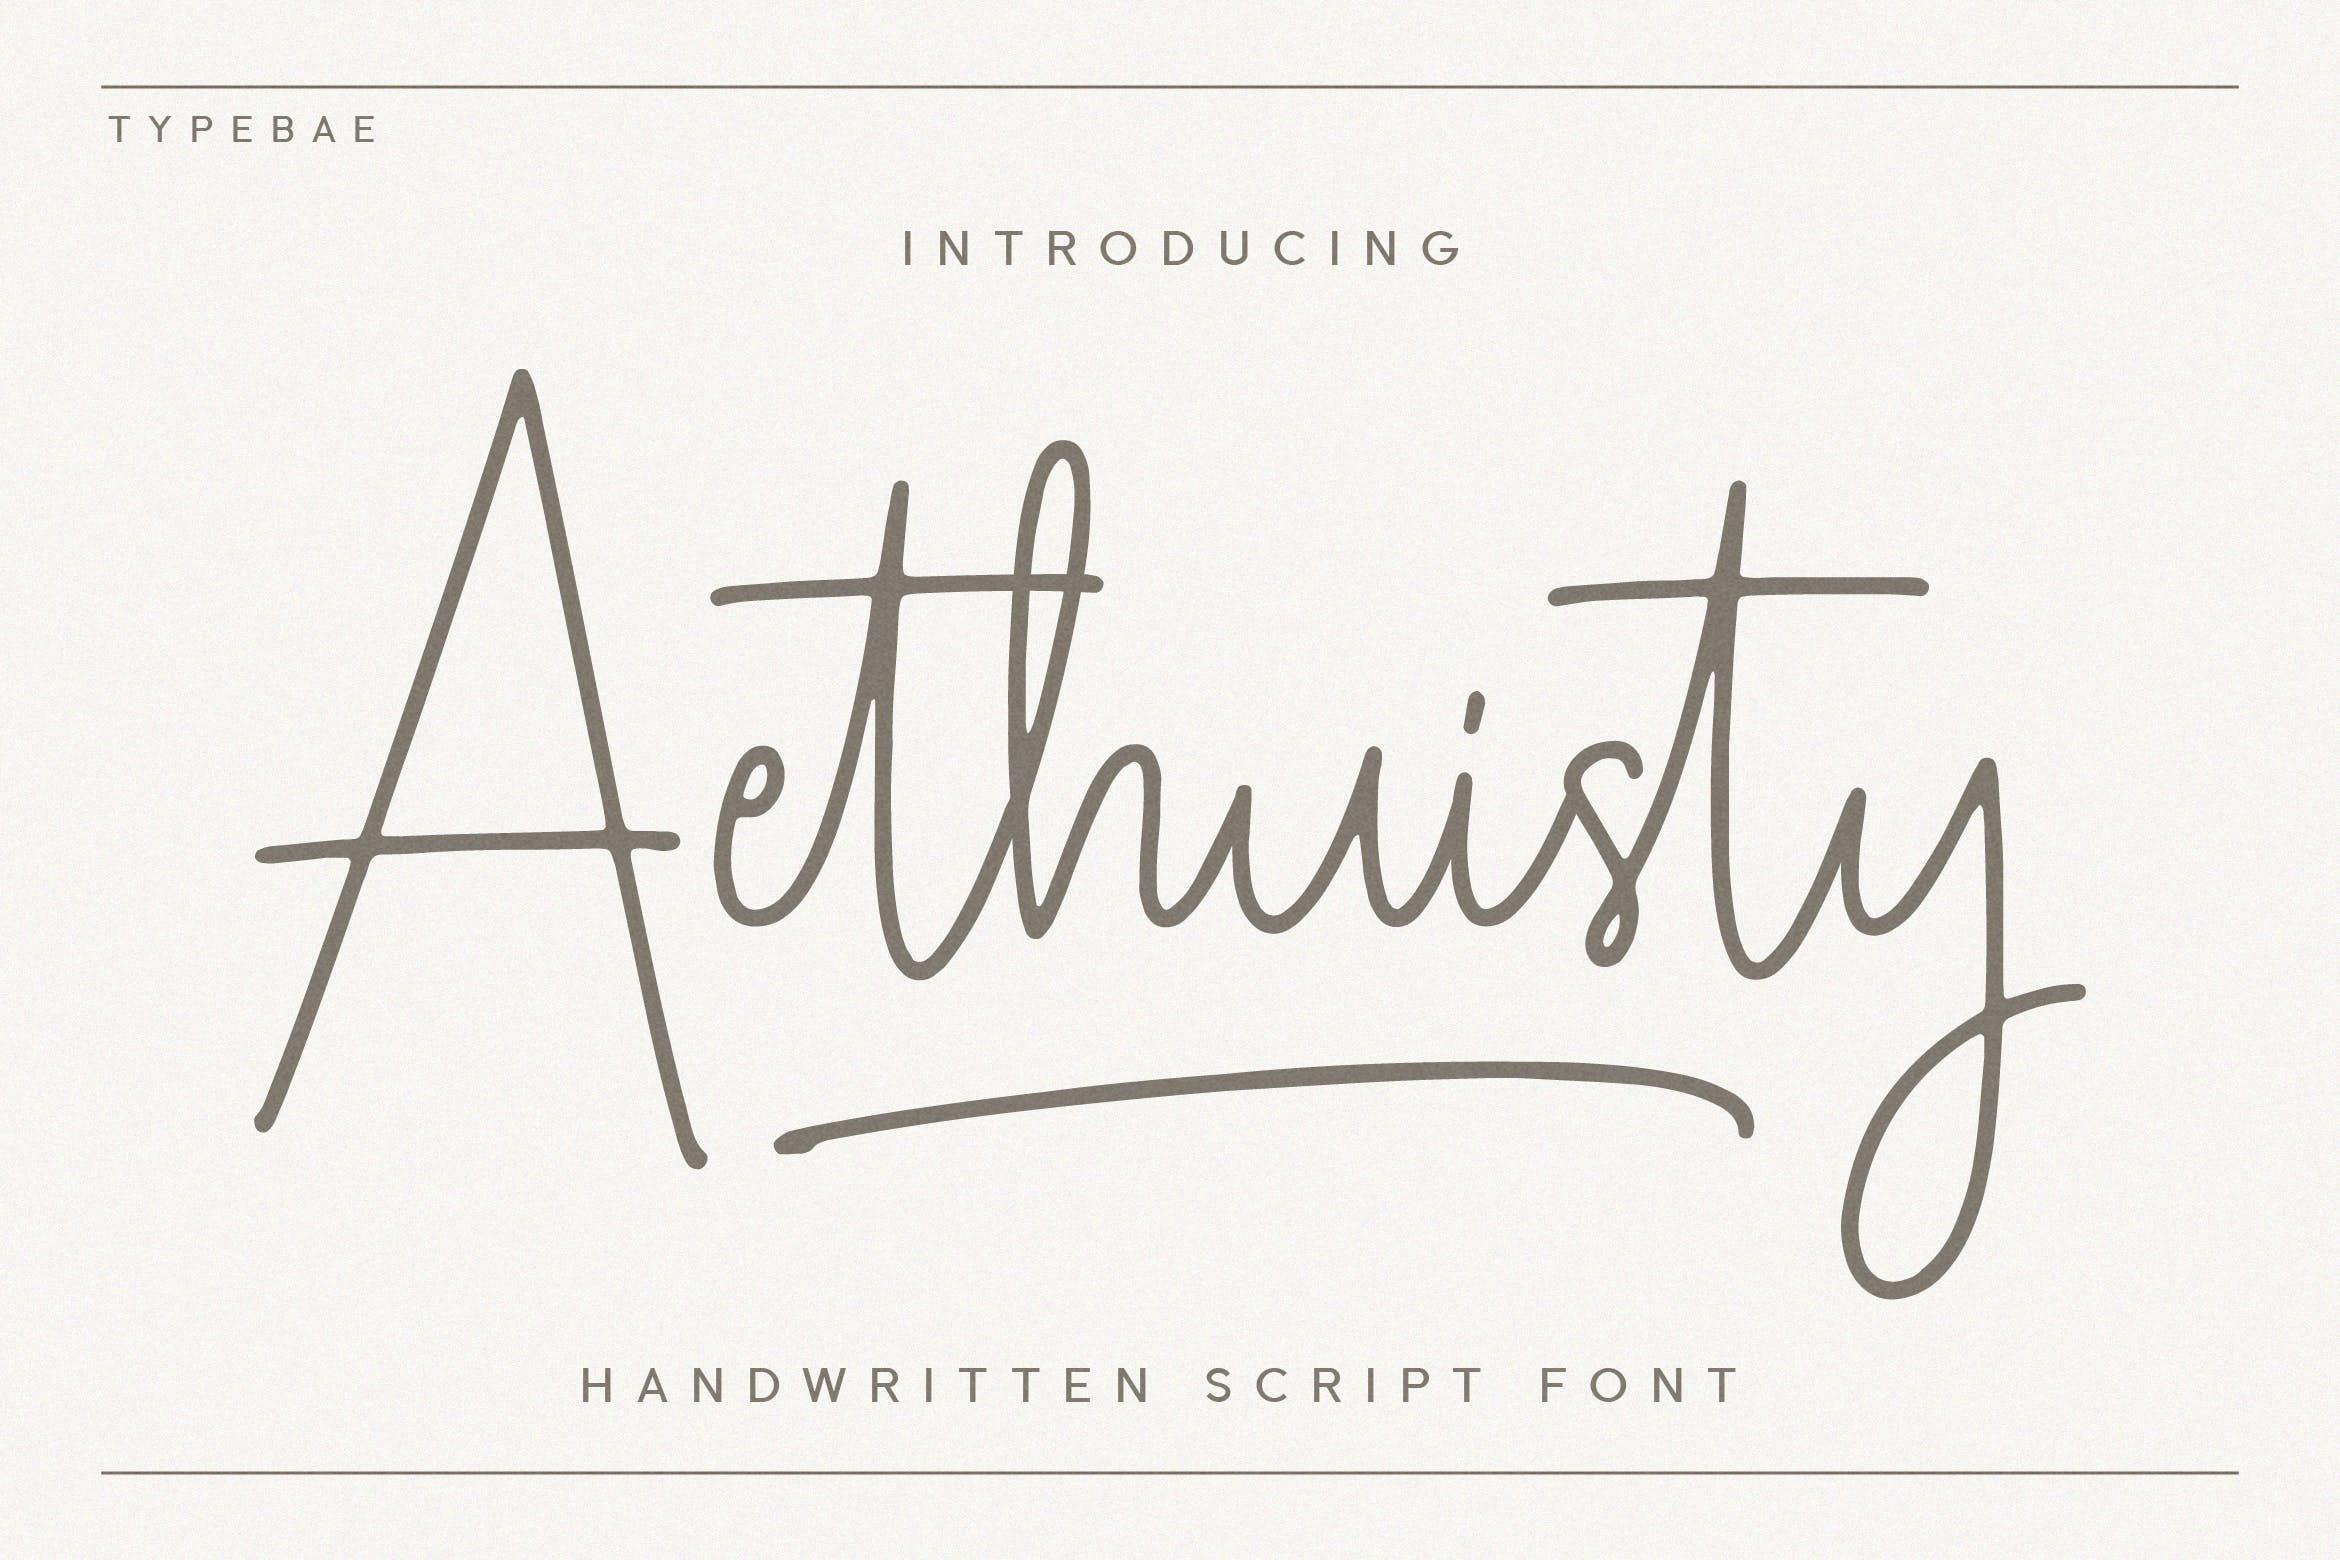 Font Aethuisty